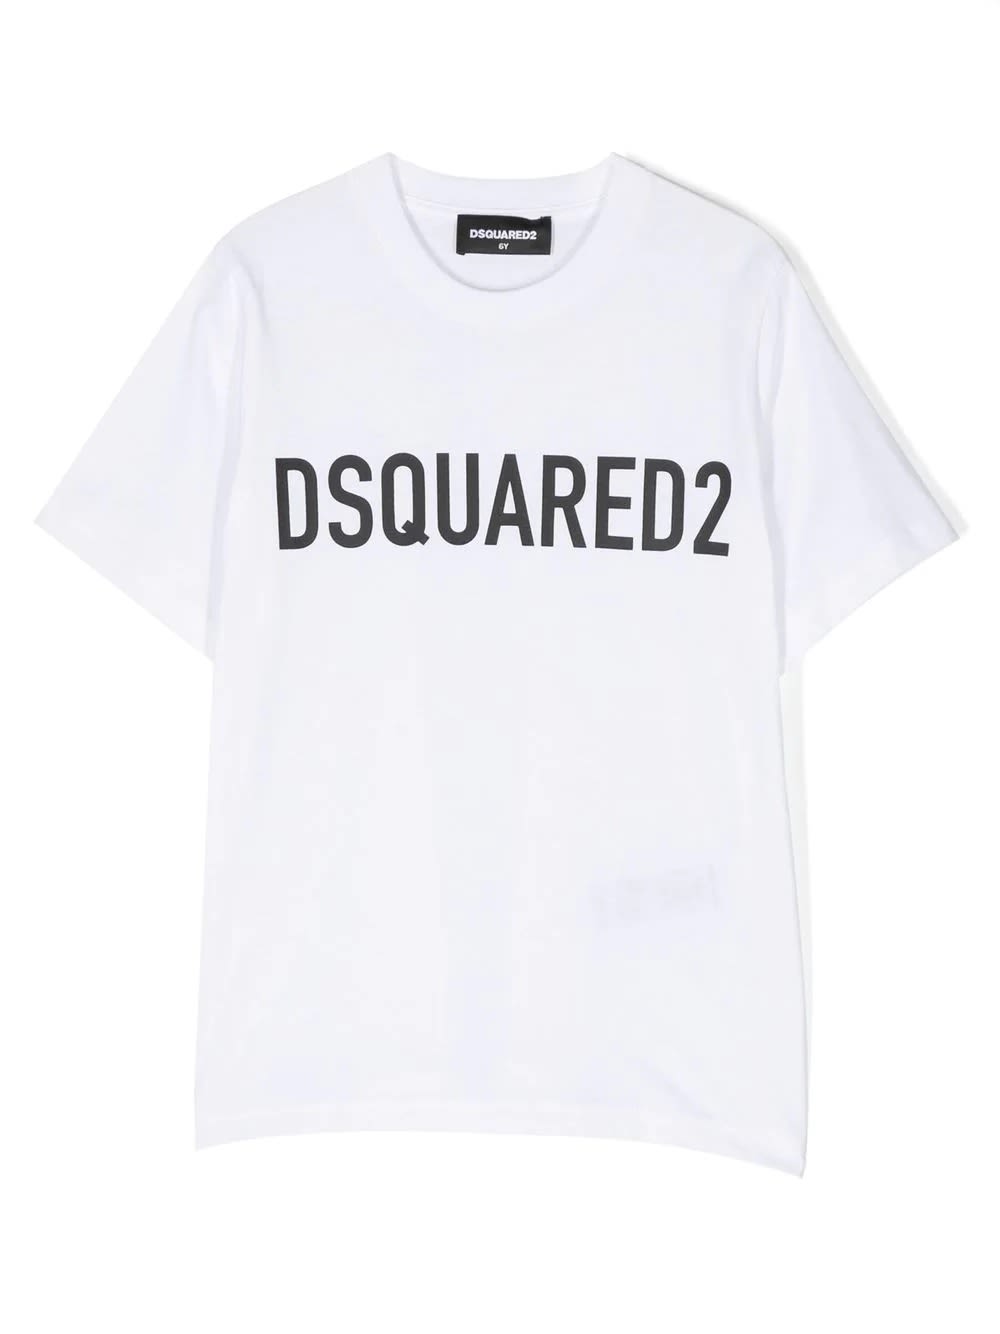 DSQUARED2 WHITE T-SHIRT WITH MAXI LOGO